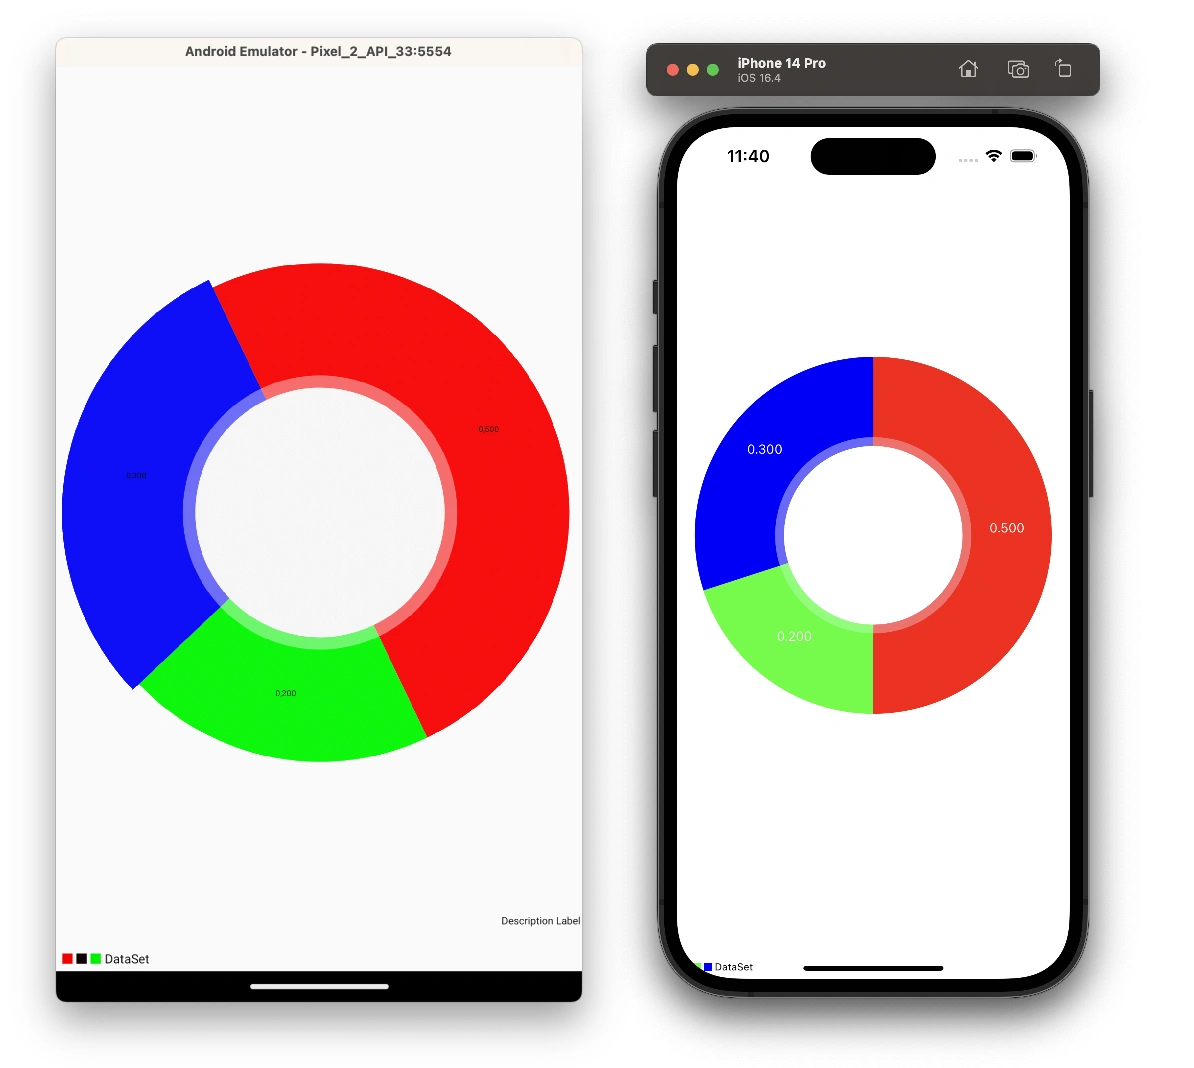 A PieChart module on Android and iOS